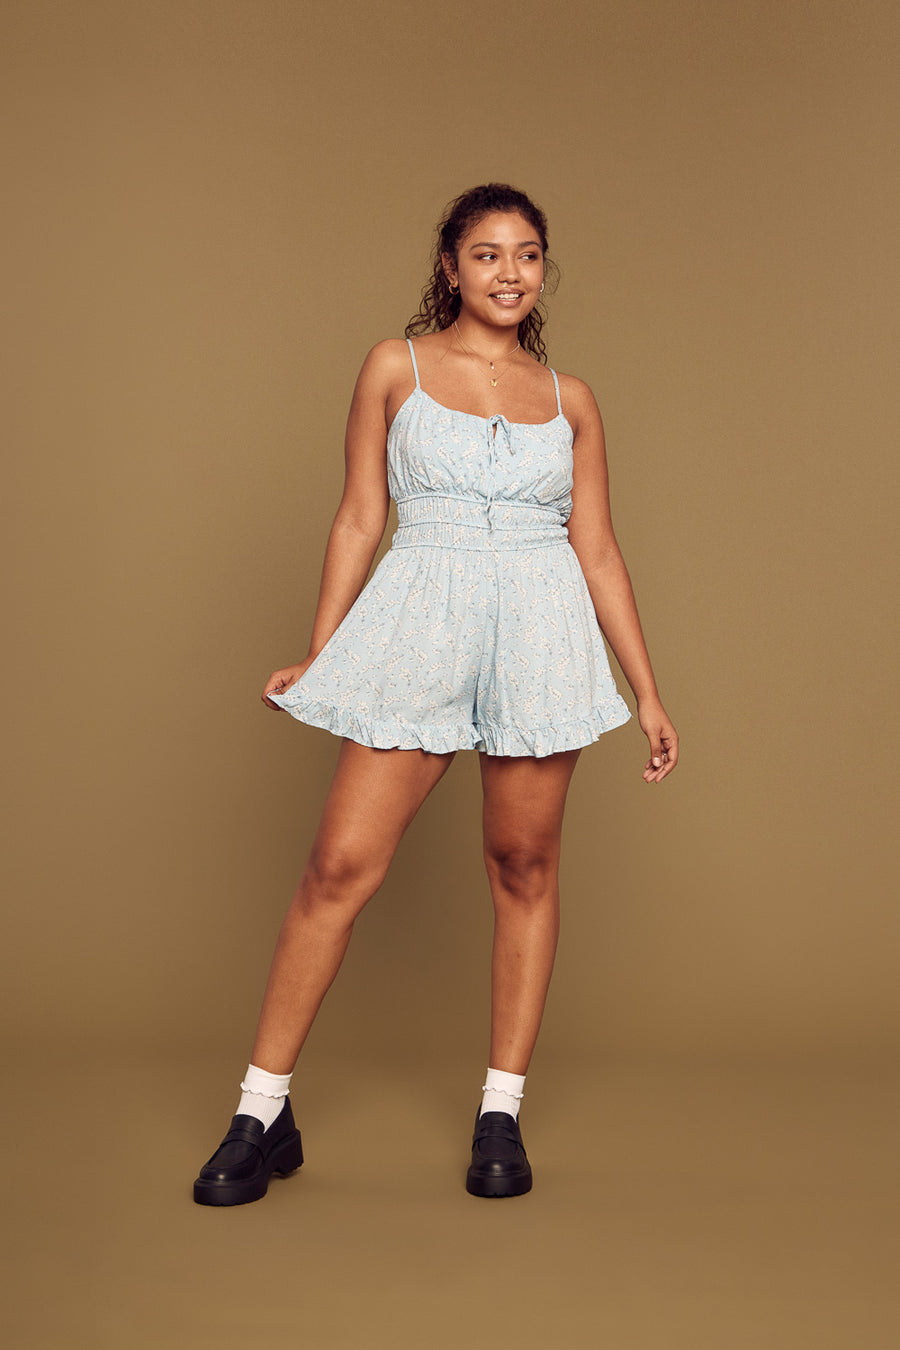 Blue Floral Strappy Romper - Trixxi Clothing